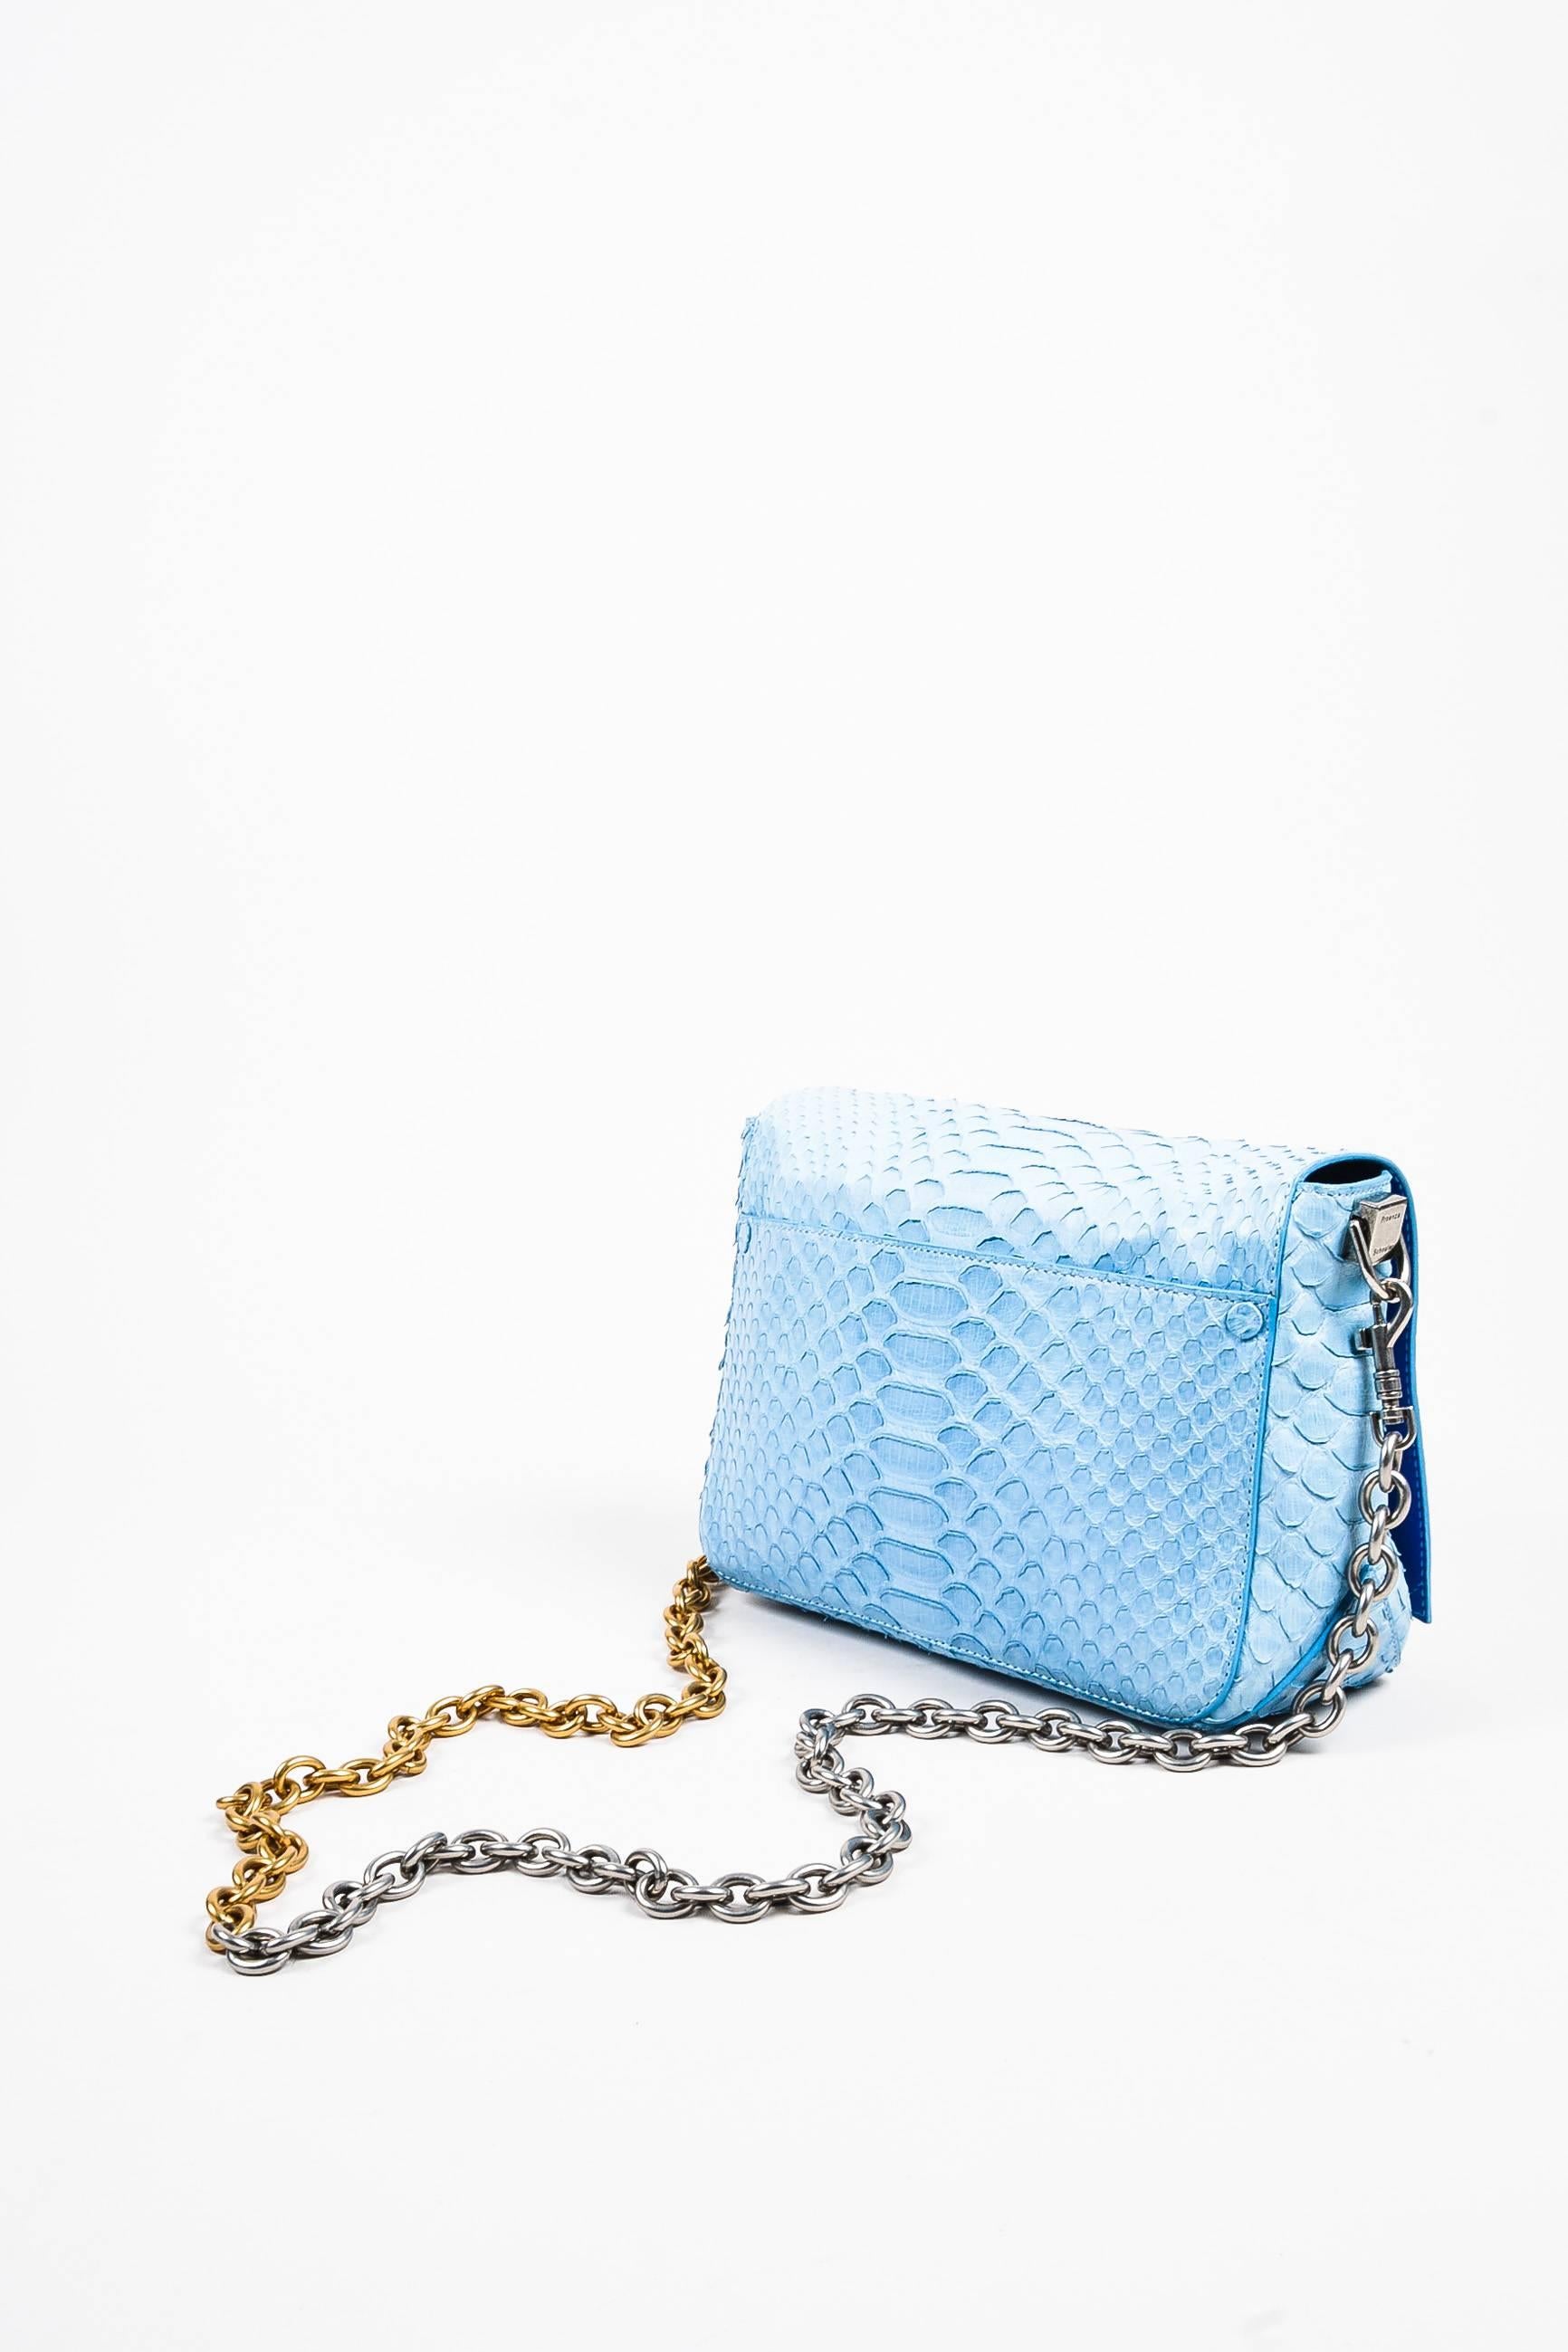 Sky blue python "Small Courier" crossbody bag from Proenza Schouler. Unique two-toned silver and gold chain link shoulder strap. Flap with hinged flip lock closure. Royal blue leather lining. RFID tag:1000067833.

Additional notes: Small